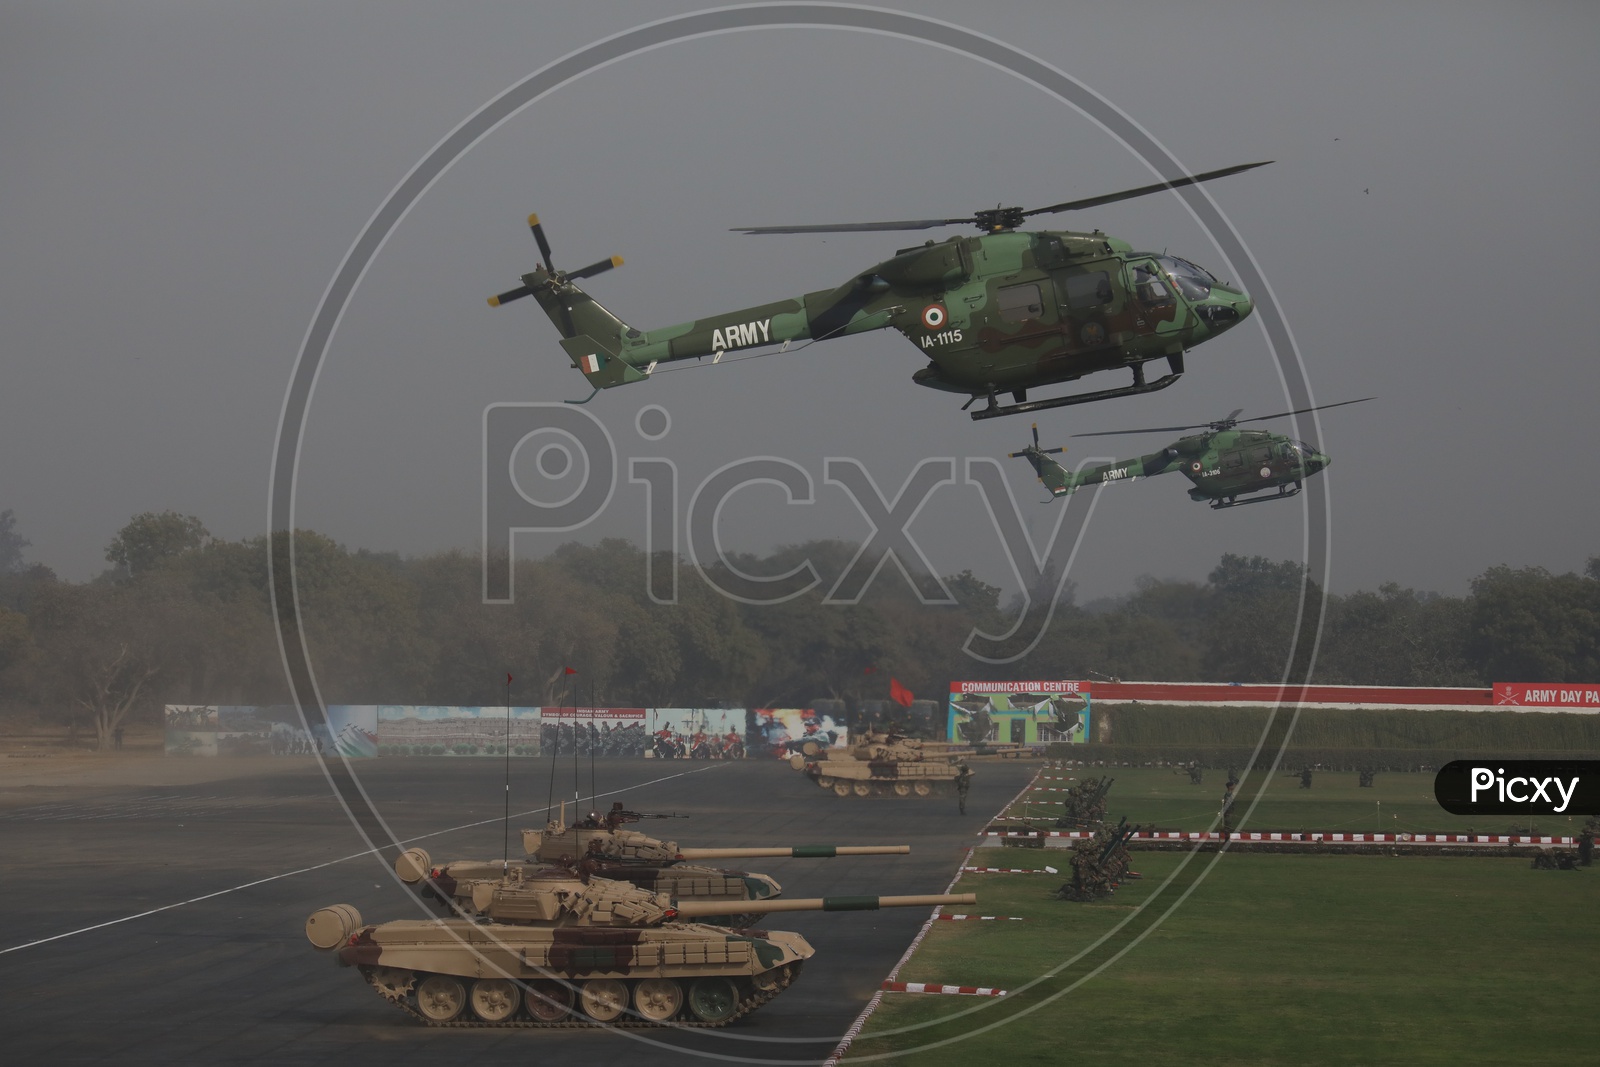 Indian Army Utility Helicopter Dhruv and Battle Tanks